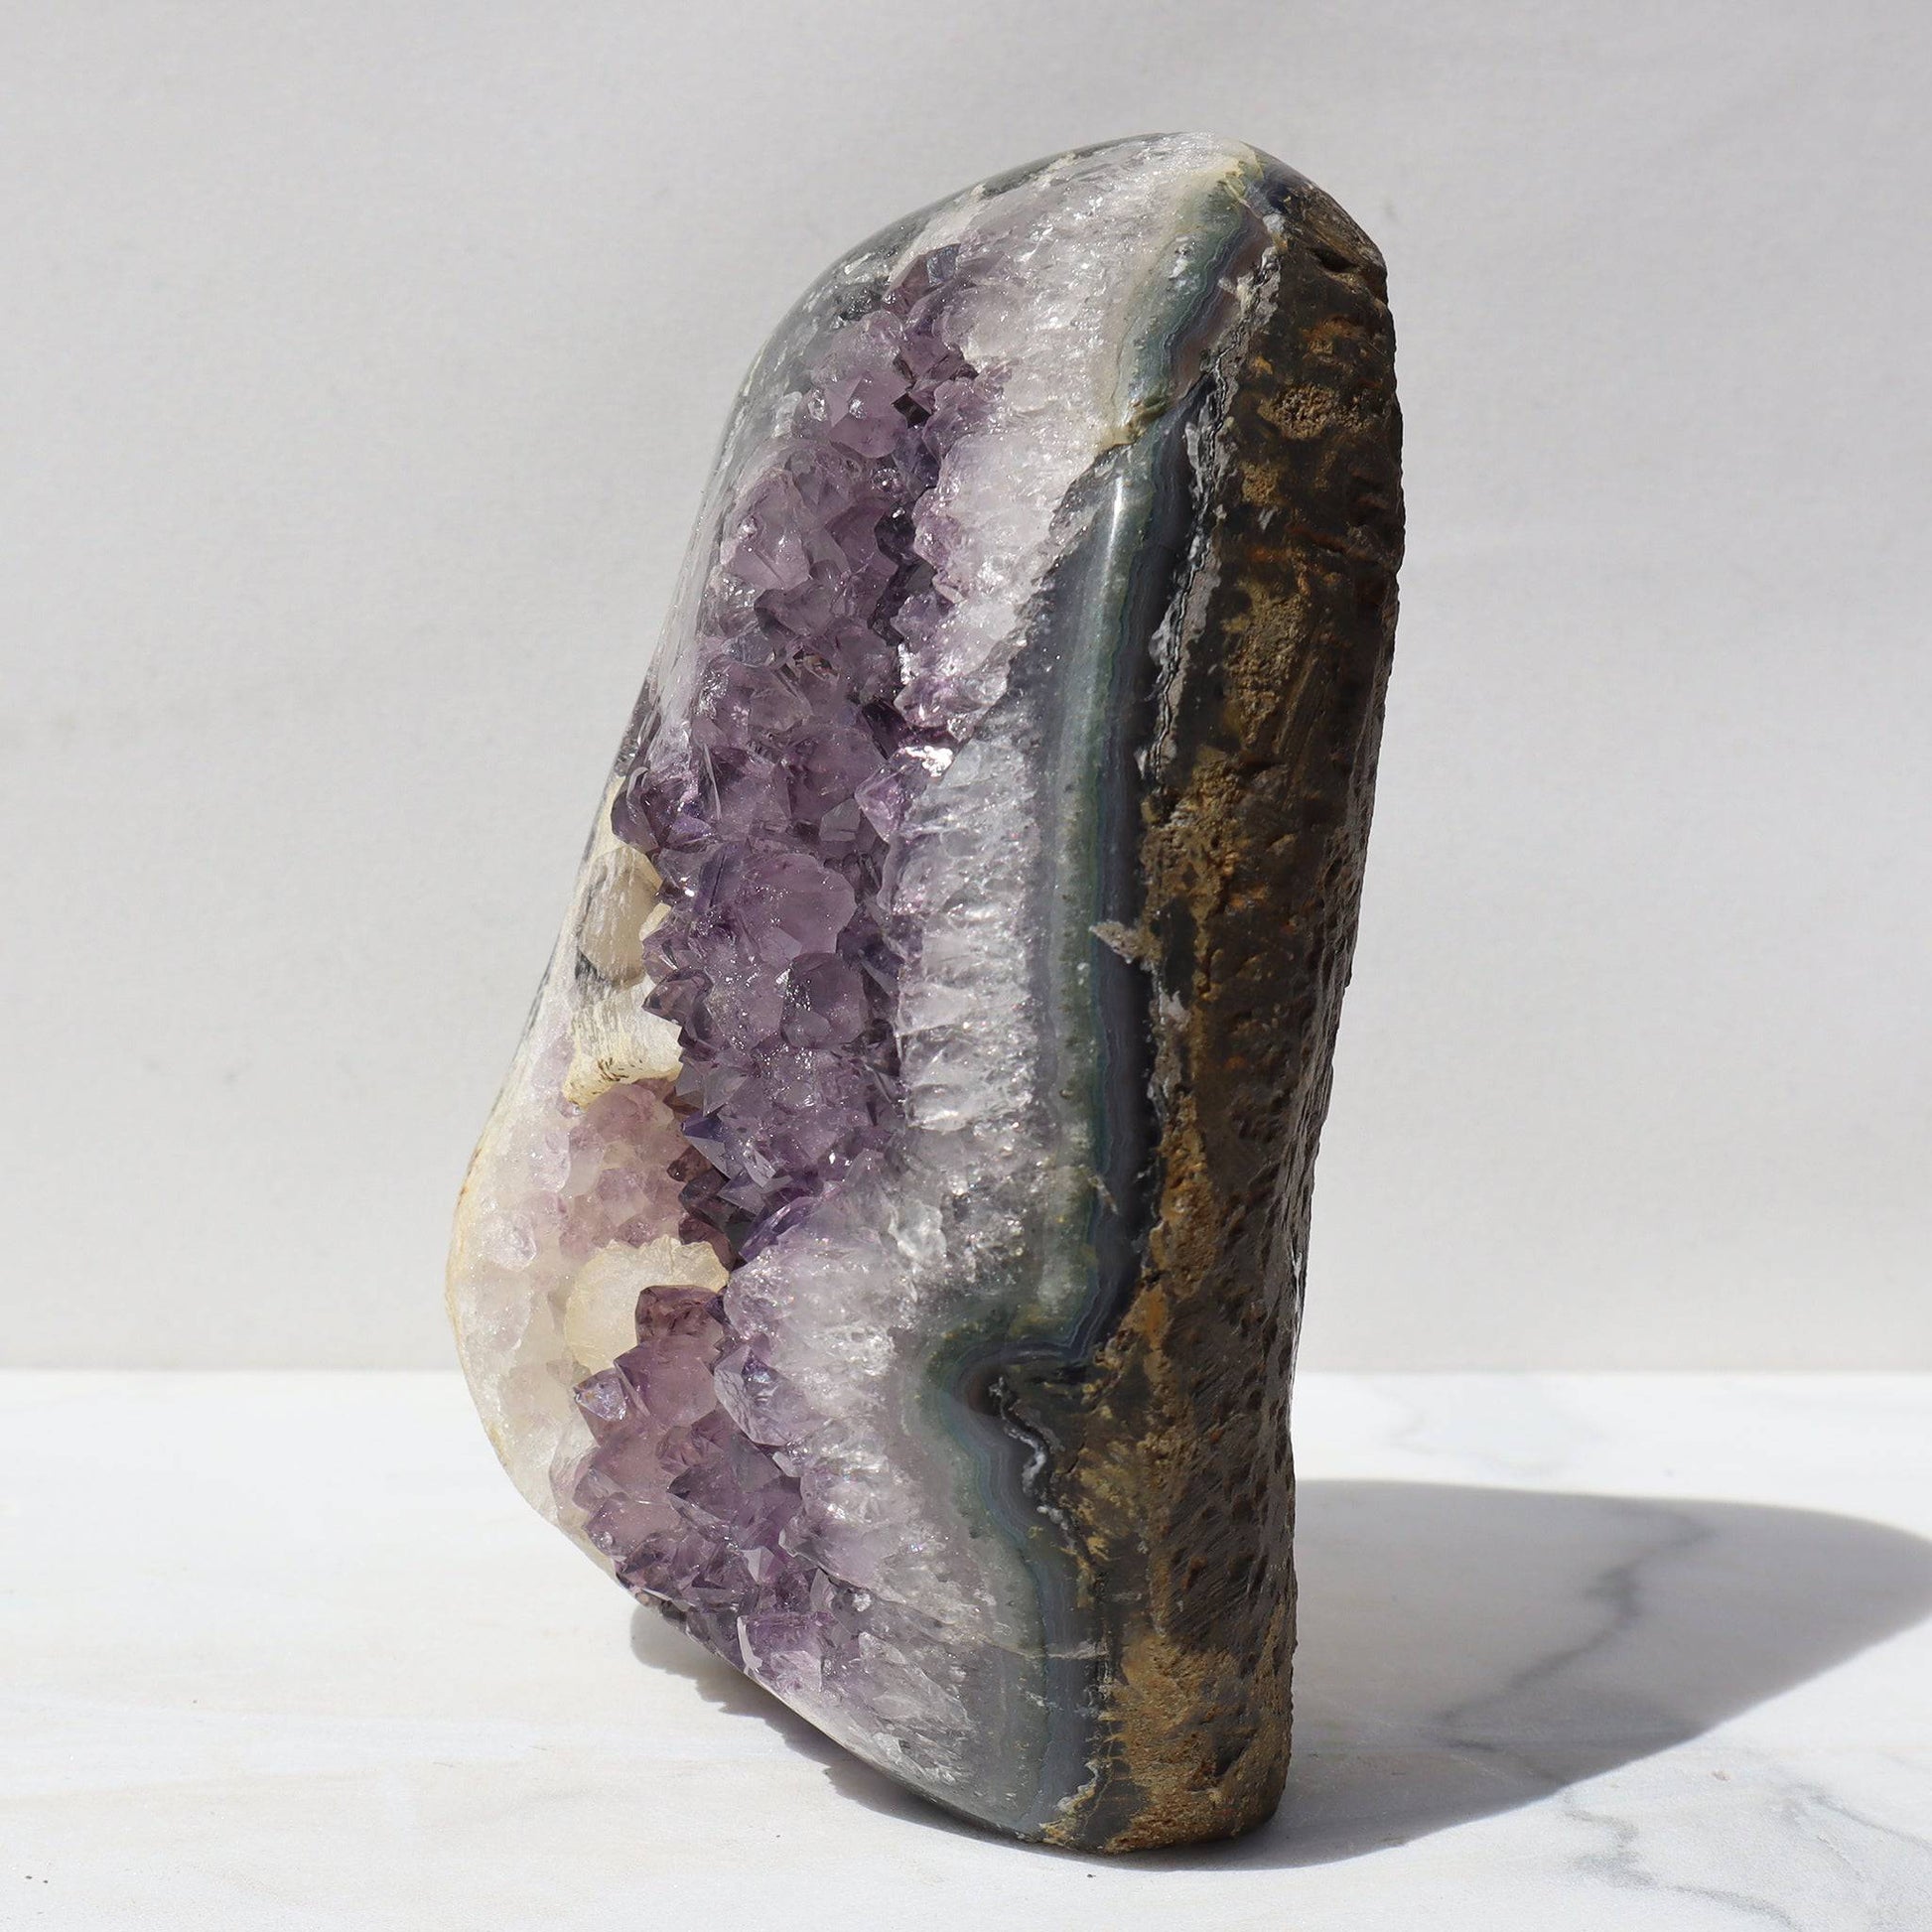 Violet Crystals and Green Jasper Rare Amethyst Jasper Geode Sale High Quality from Uruguay  - Deepest Earth